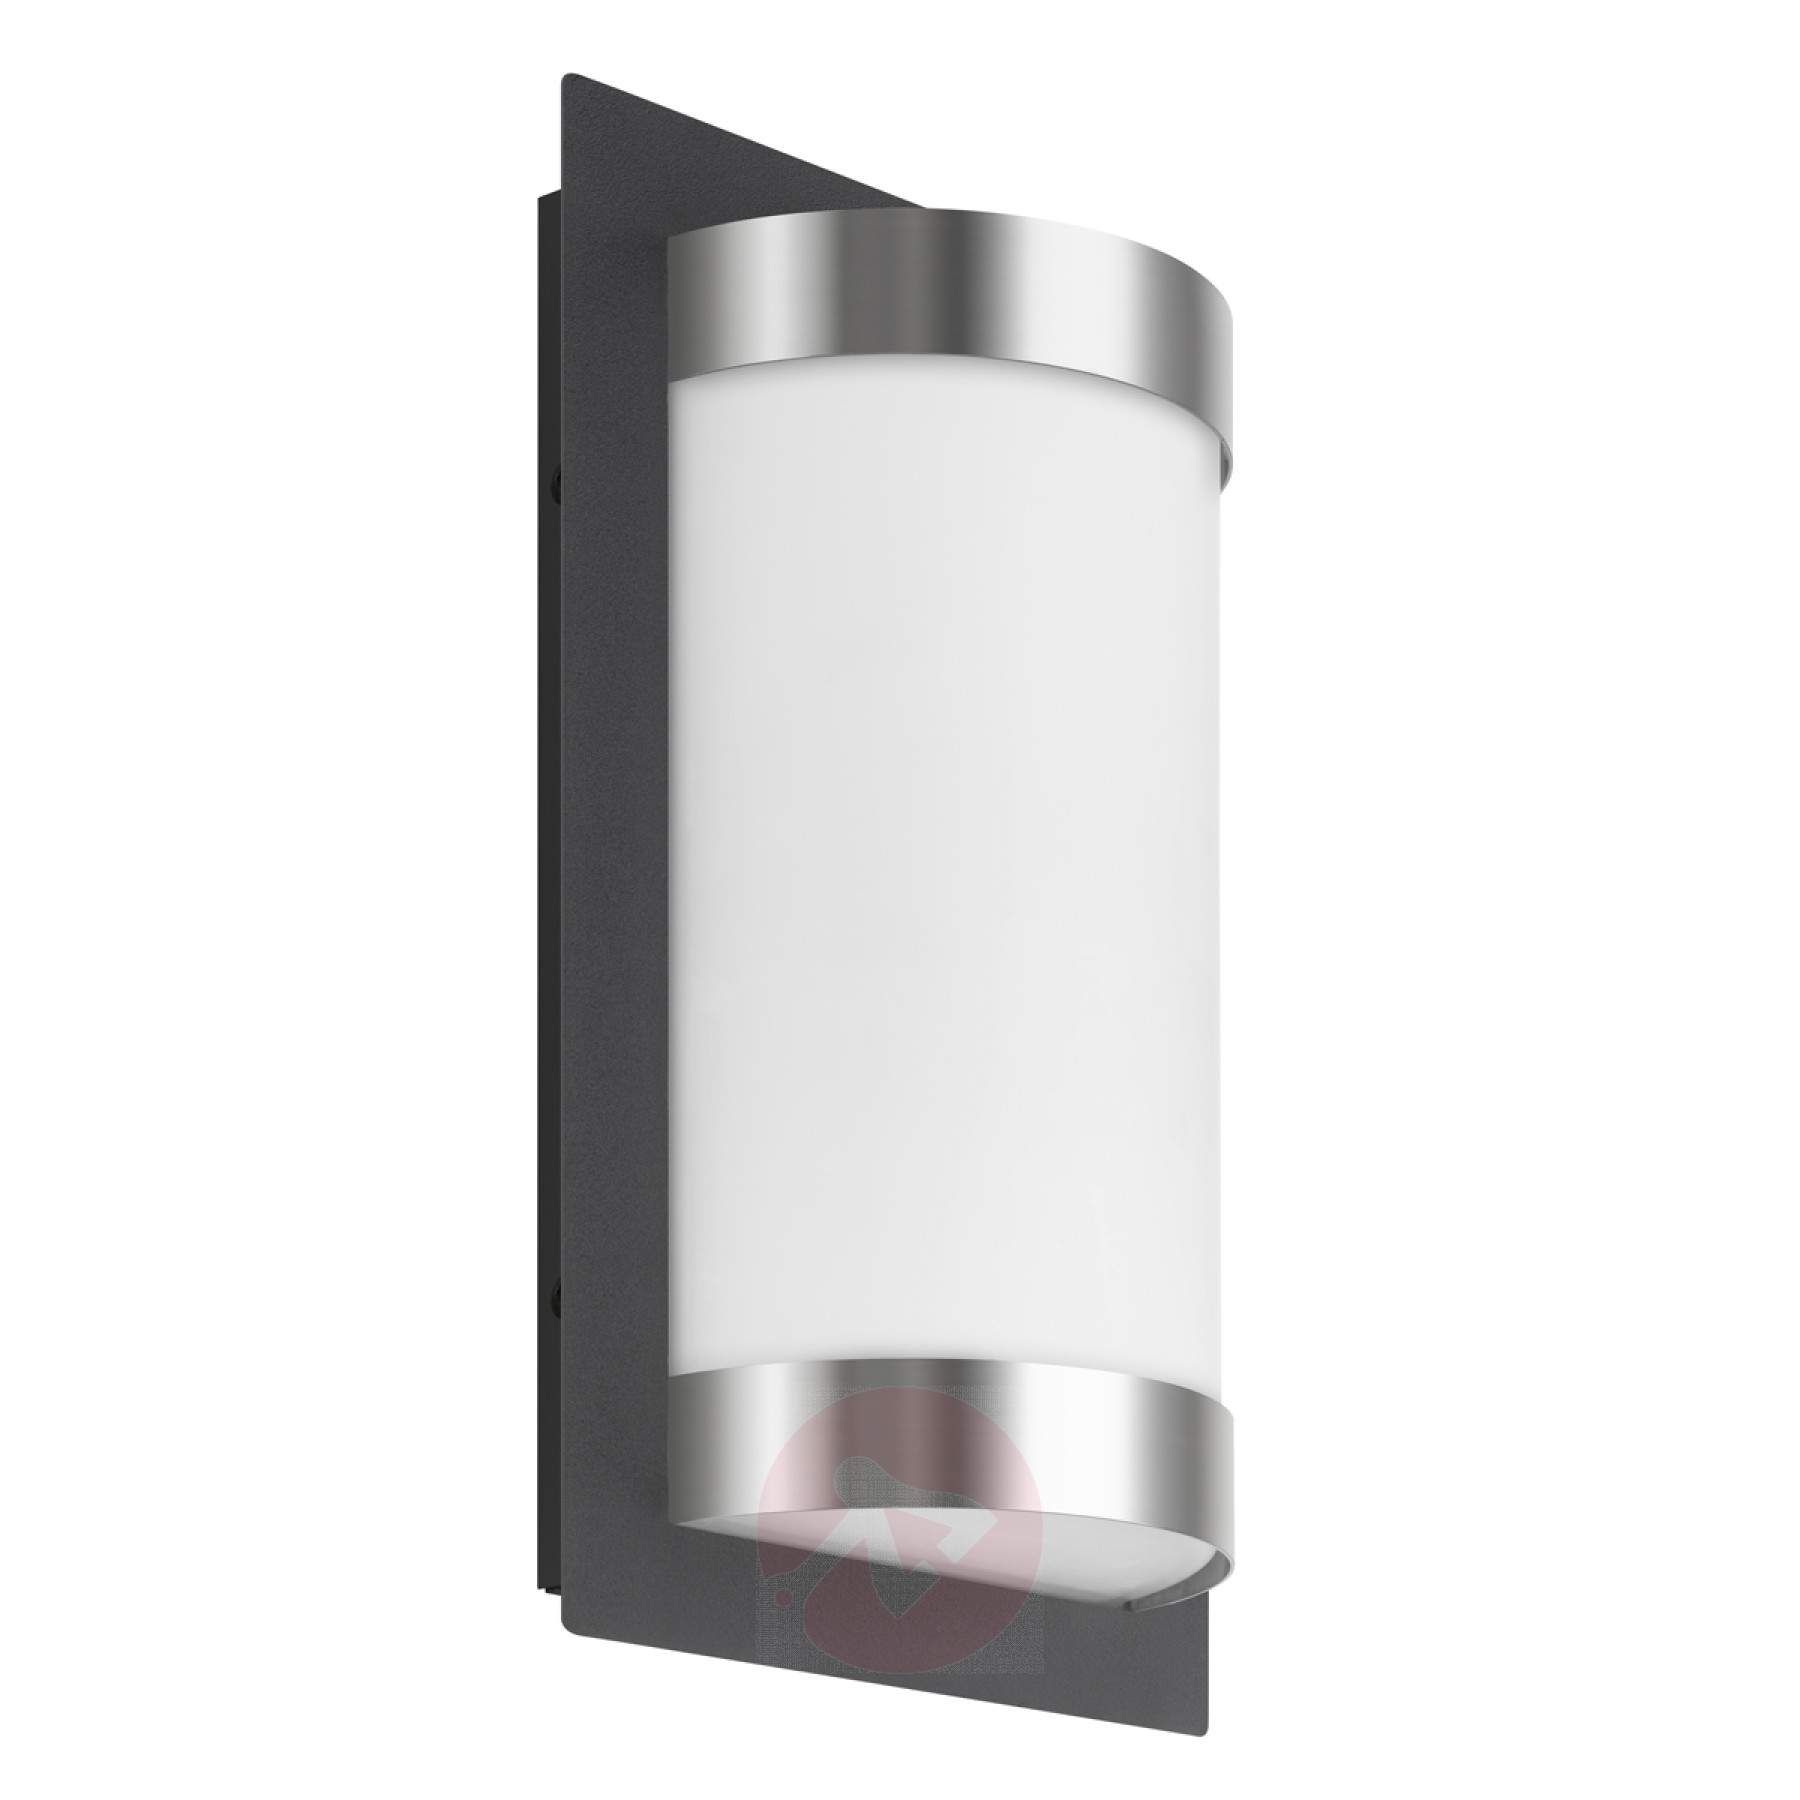 High Quality Apollo Outdoor Wall Light | Lights (View 8 of 15)